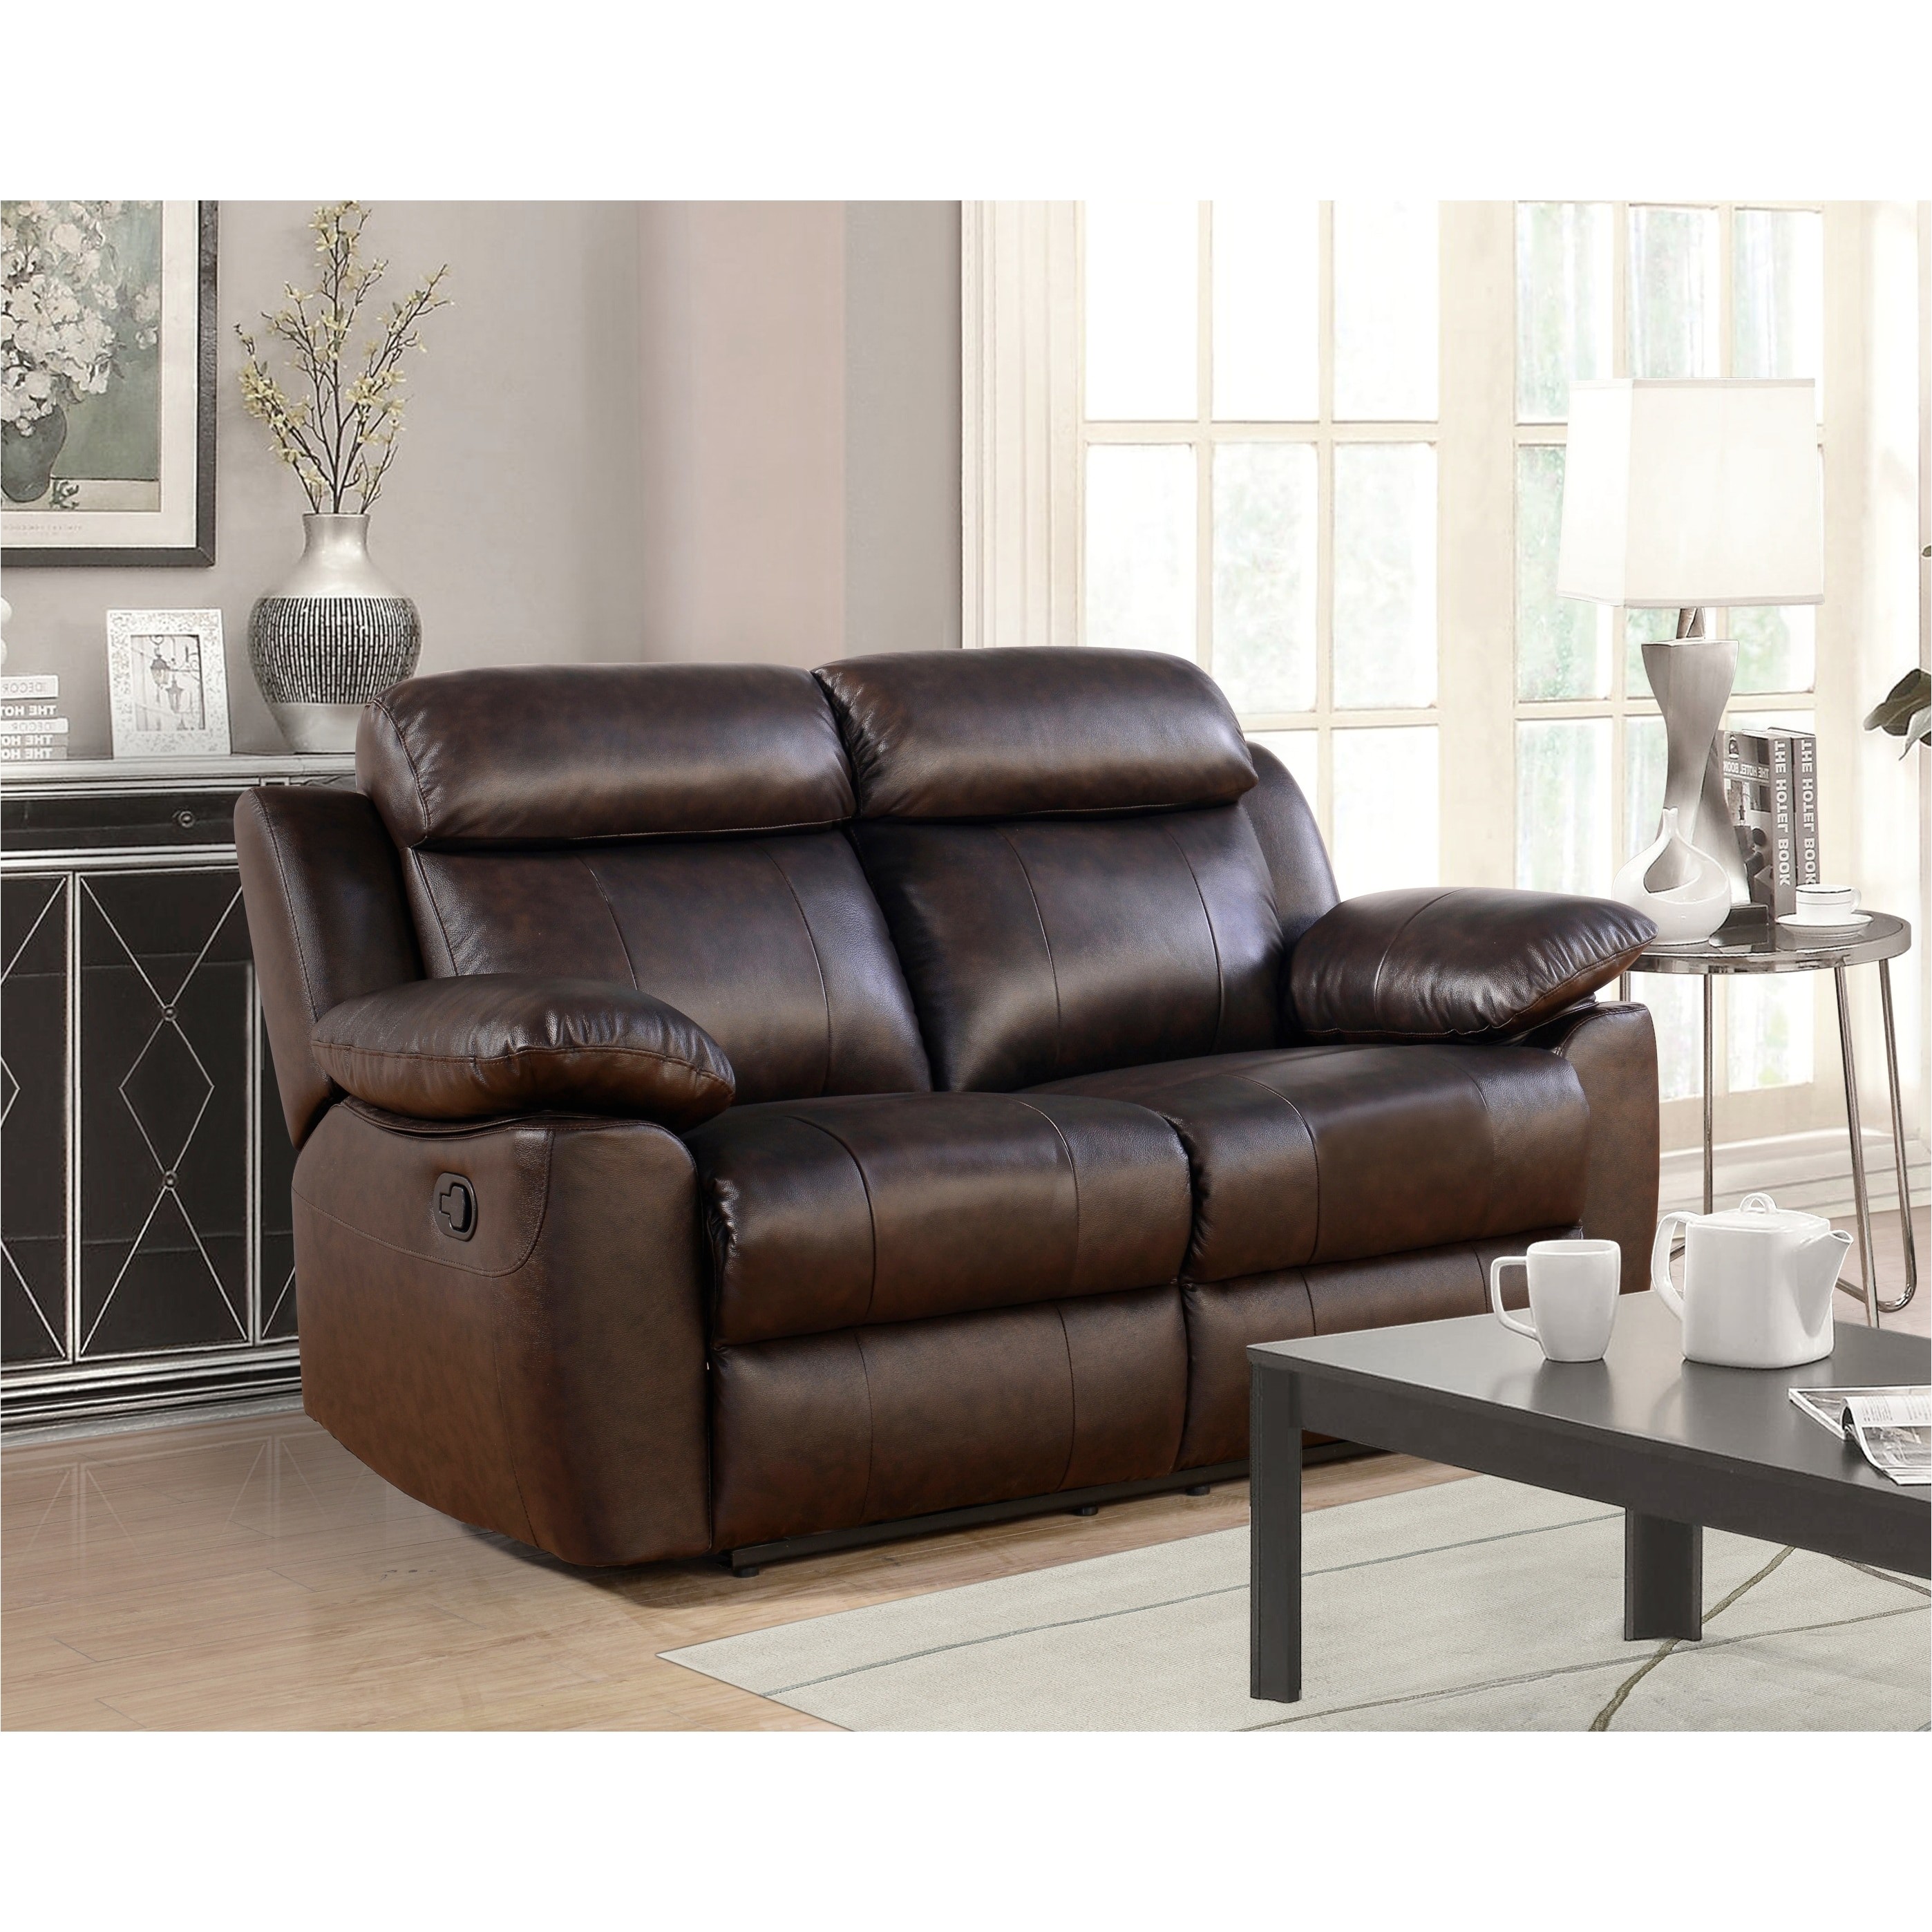 shop abbyson braylen top grain leather reclining loveseat on sale free shipping today overstock com 19297546